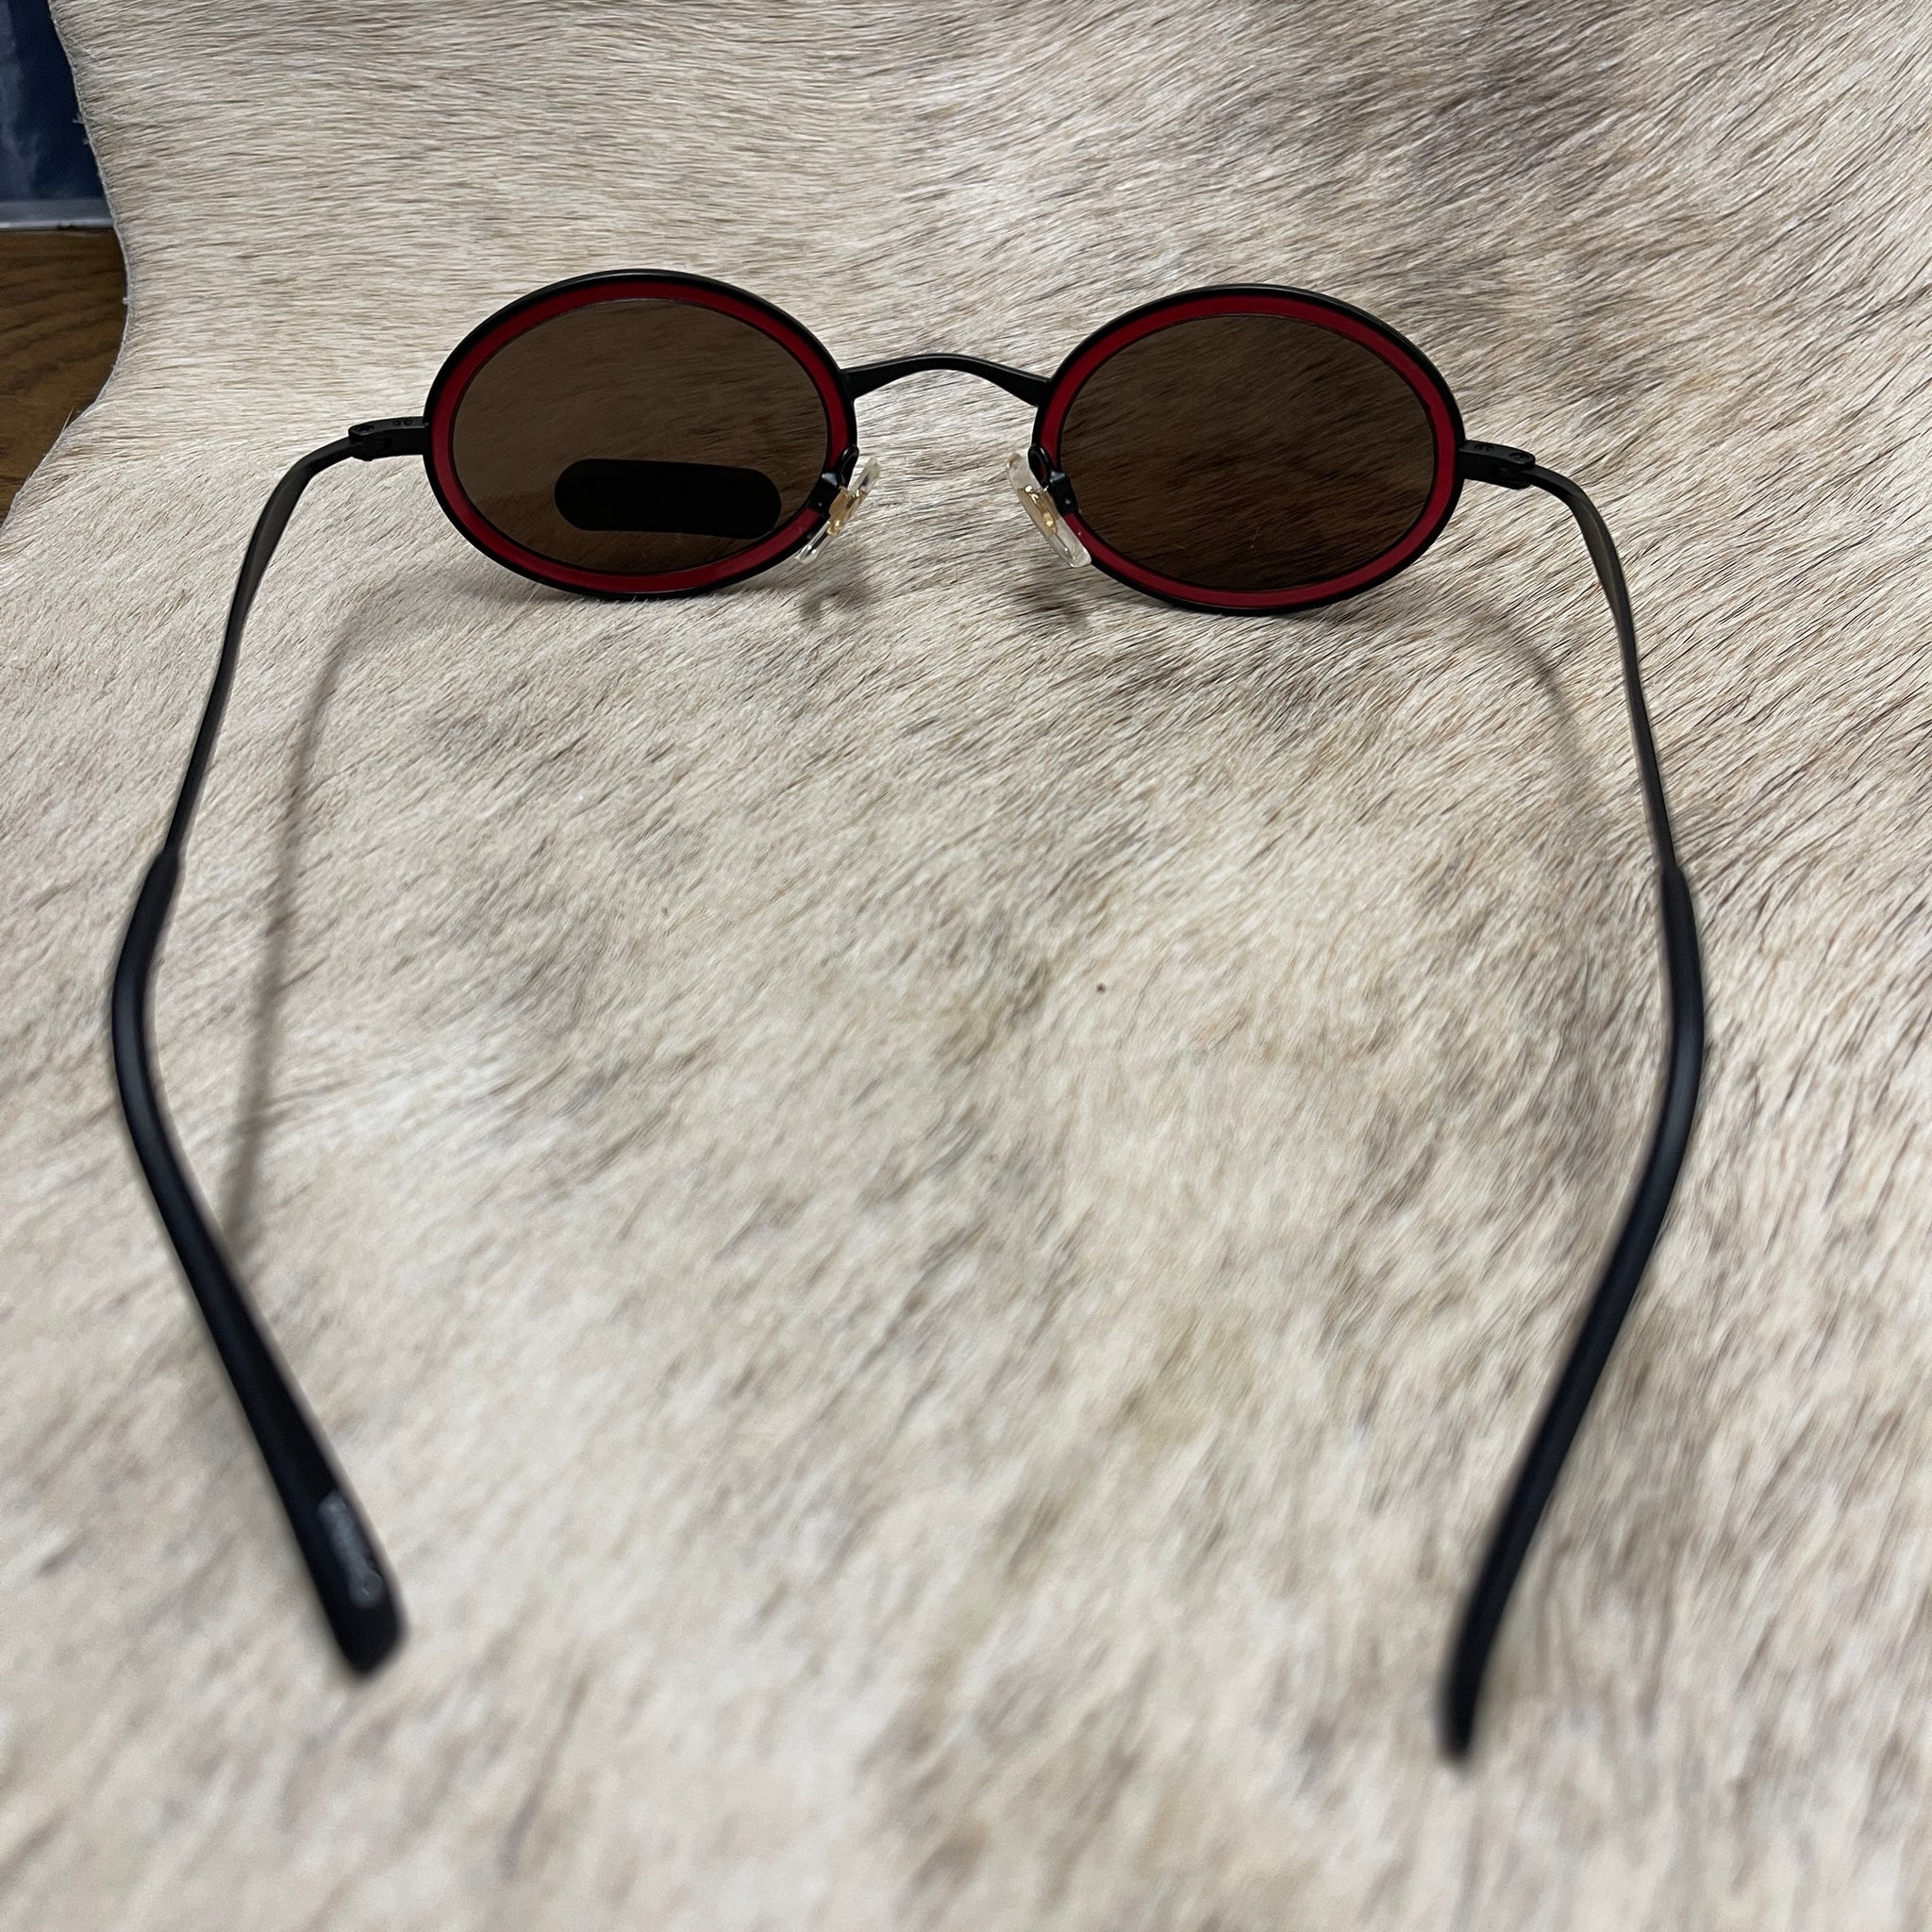 New Old stock 90s Sunglasses